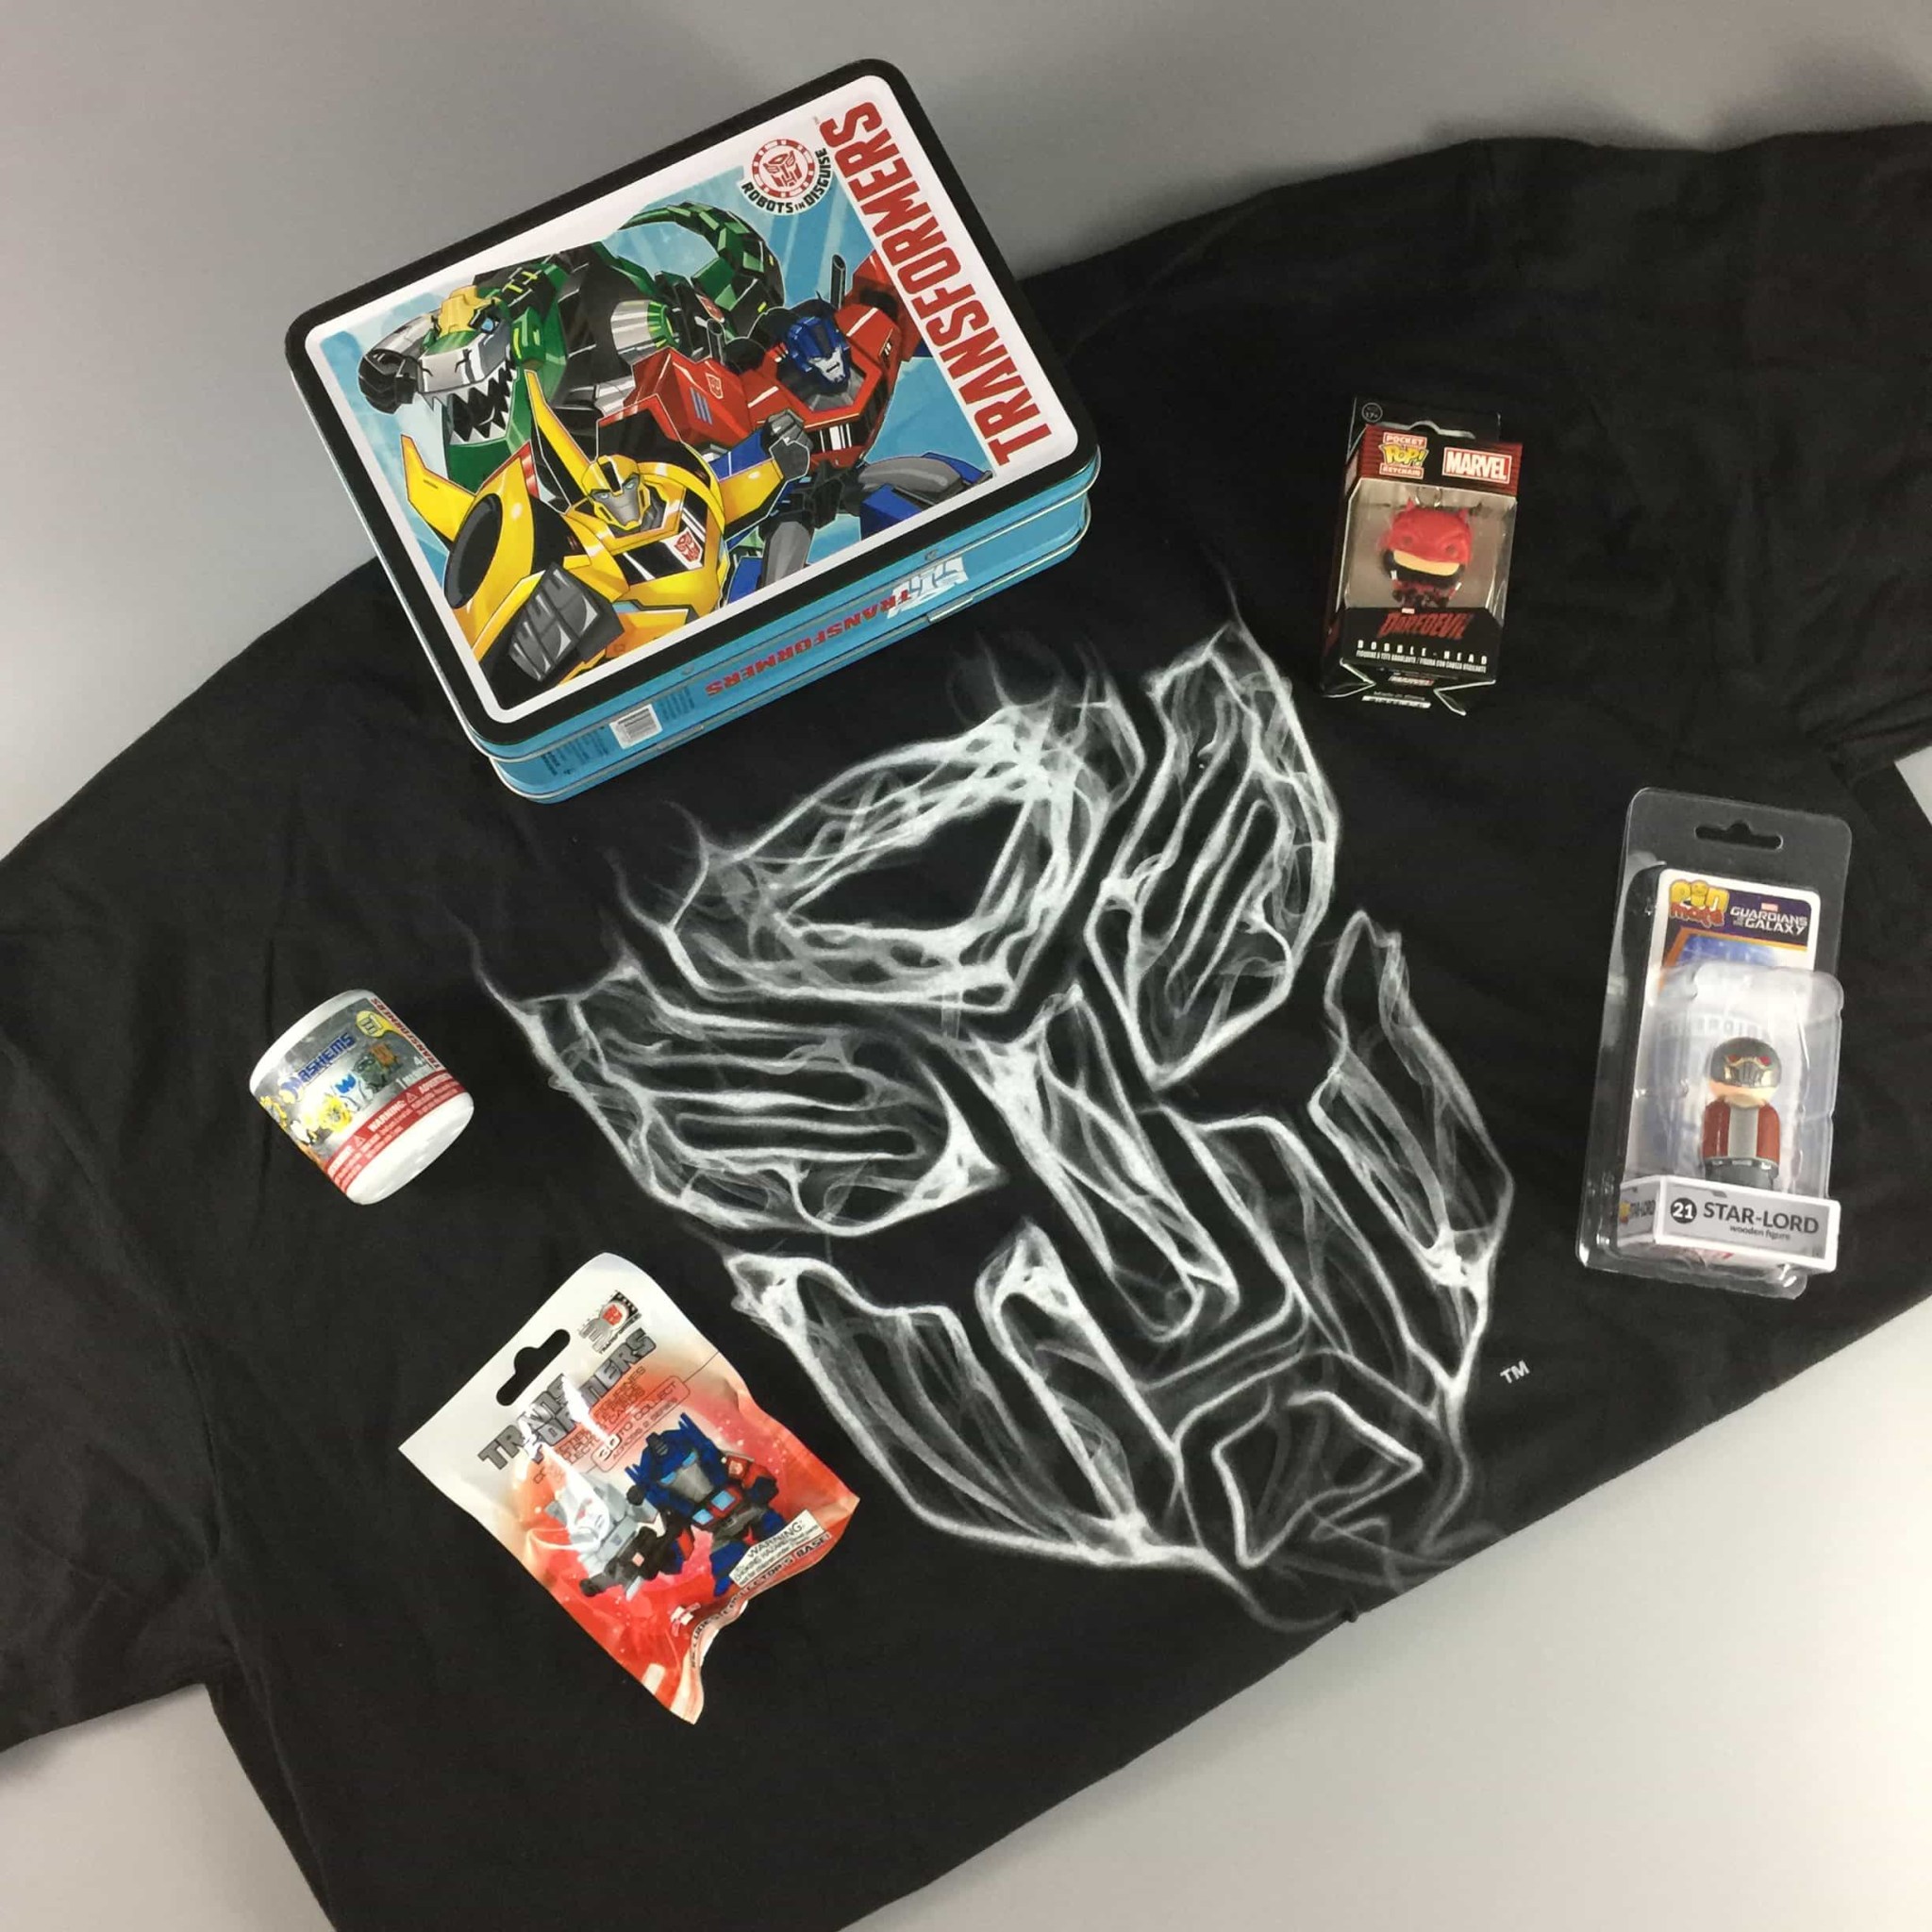 Powered Geek Box Reviews: Get All The Details At Hello Subscription!